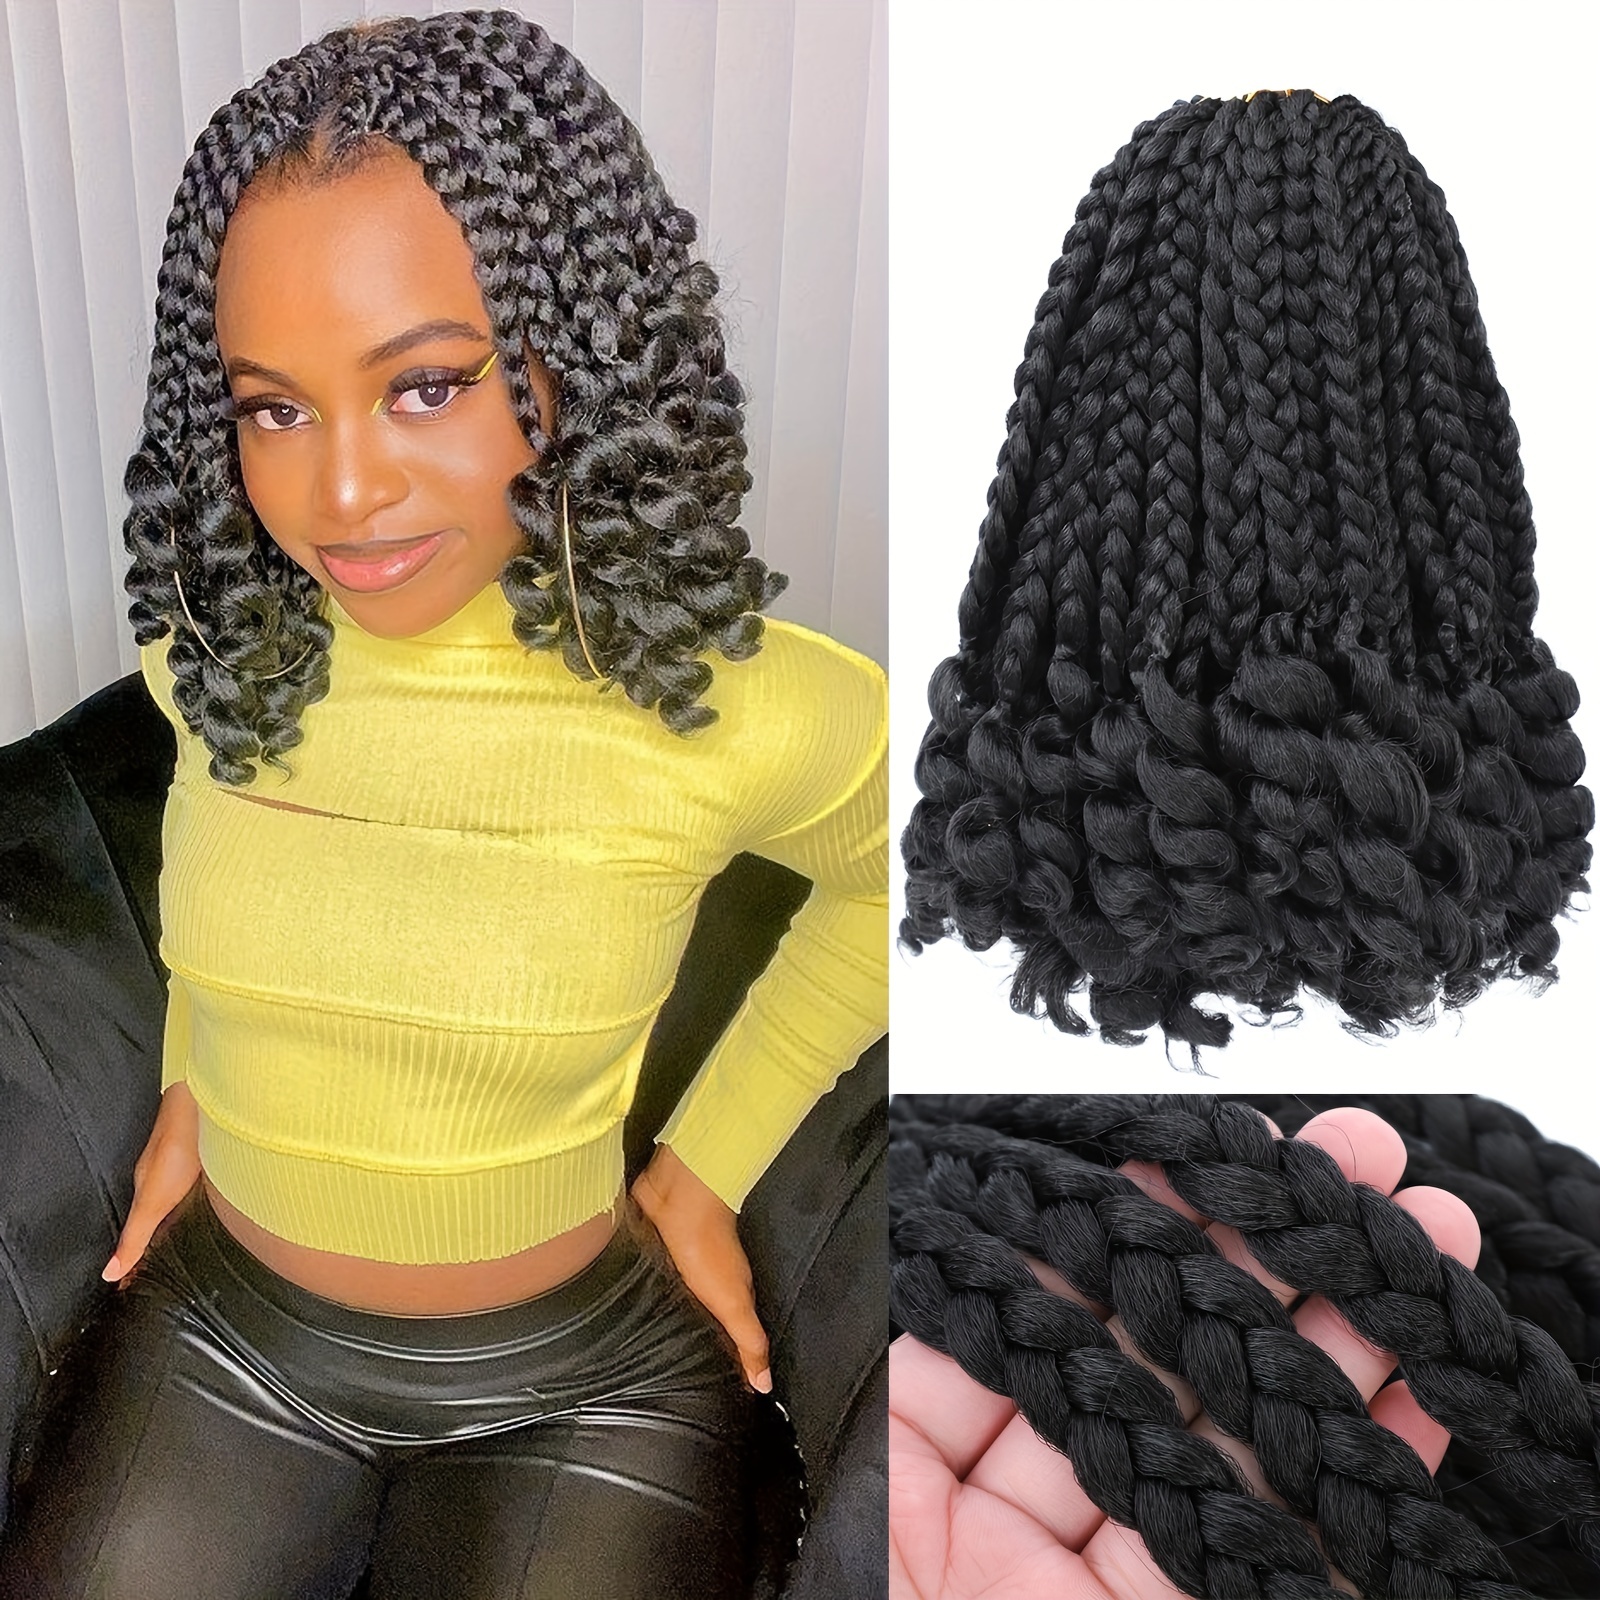 Synthetic Crochet Hair Short Bob Box Braid with Curly Ends 20inch Omber  Blonde Pre Stretched Box Braids for Women Kids